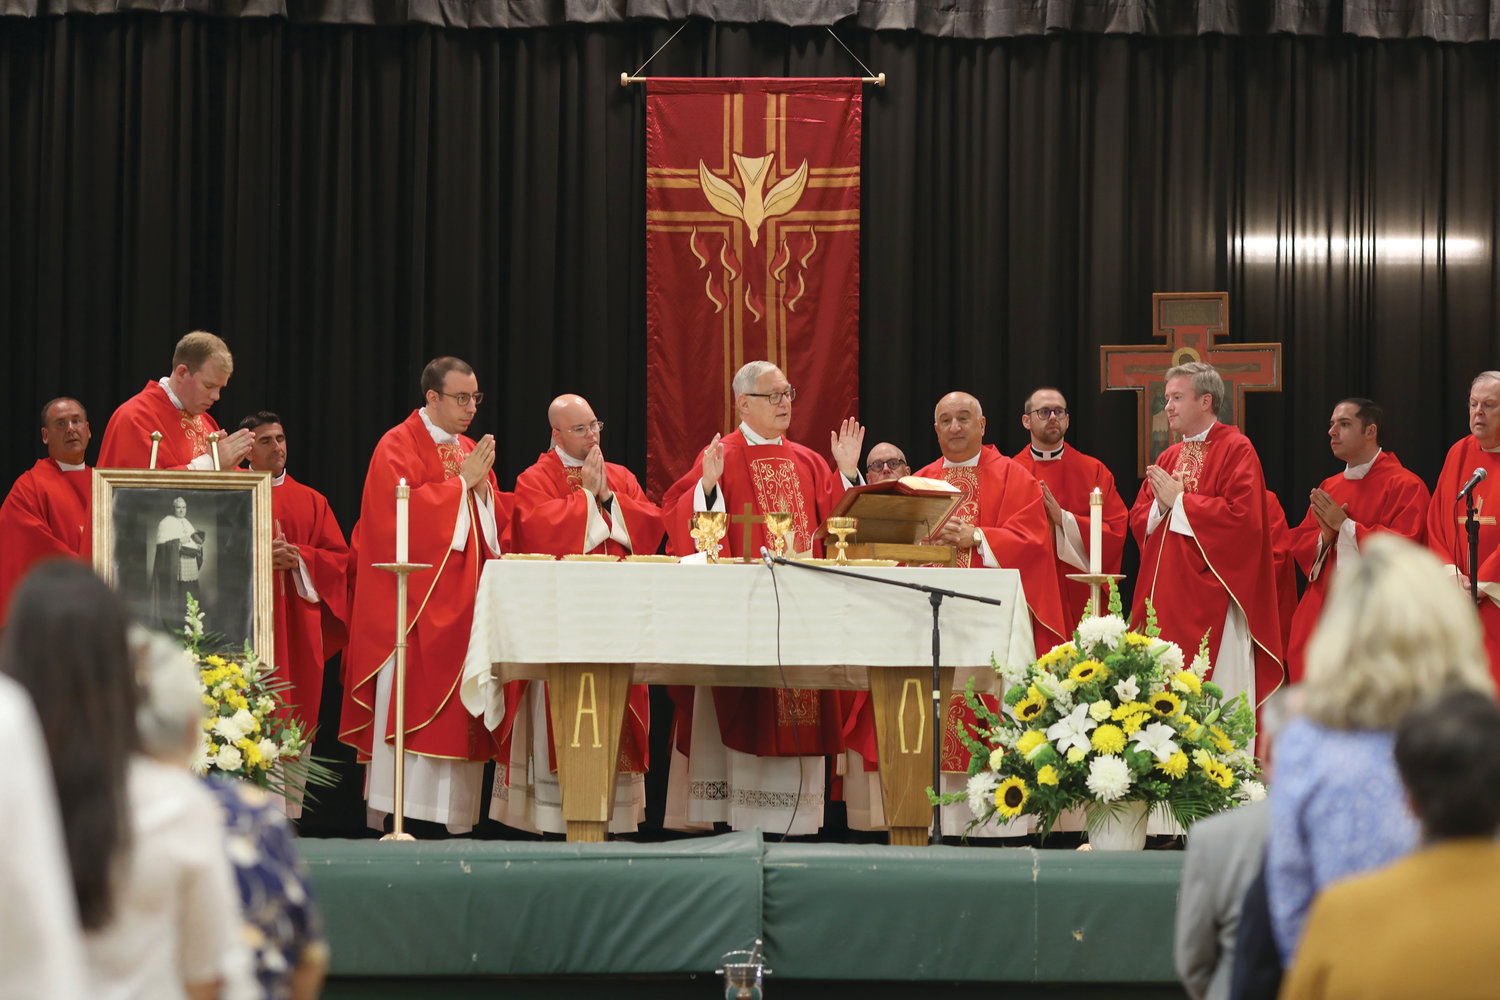 On Monday, Sept. 9, Bishop Thomas J. Tobin joined priests from throughout the diocese to celebrate a Mass recognizing the 60th anniversary of the founding of Bishop Hendricken High School.